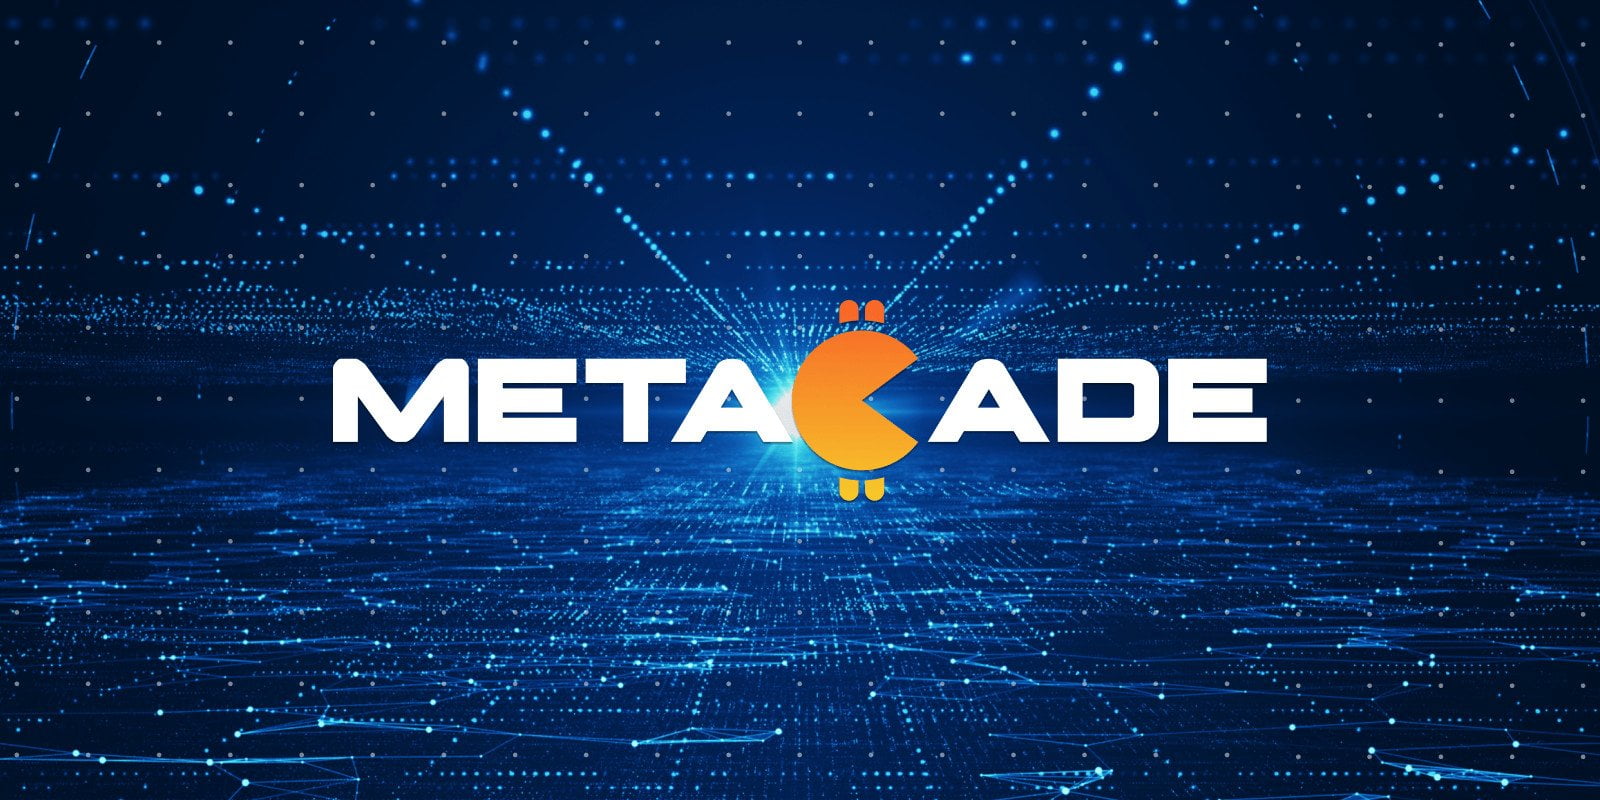 Metacade presale passes $2 million - only $690k remaining before it sells out 12